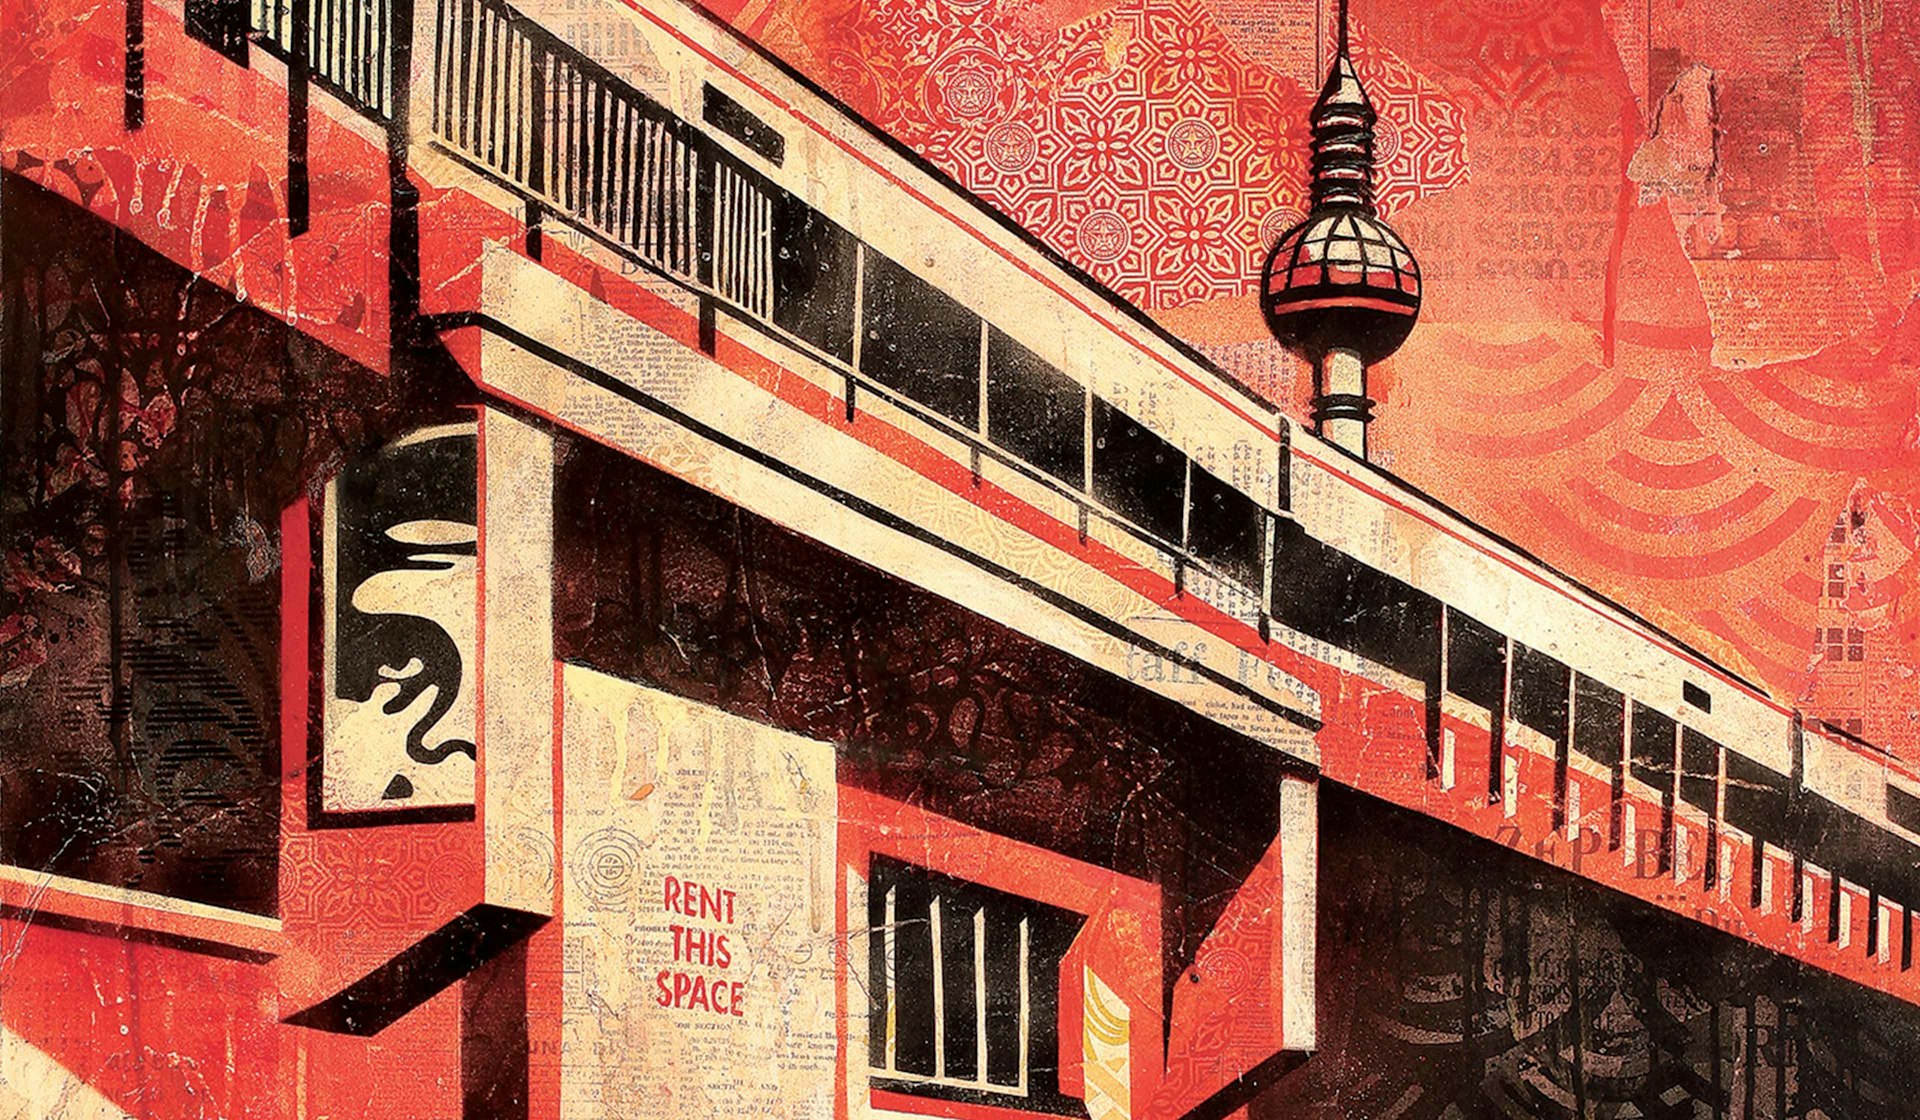 Shepard Fairey, Swoon and other top street artists reimagine the city